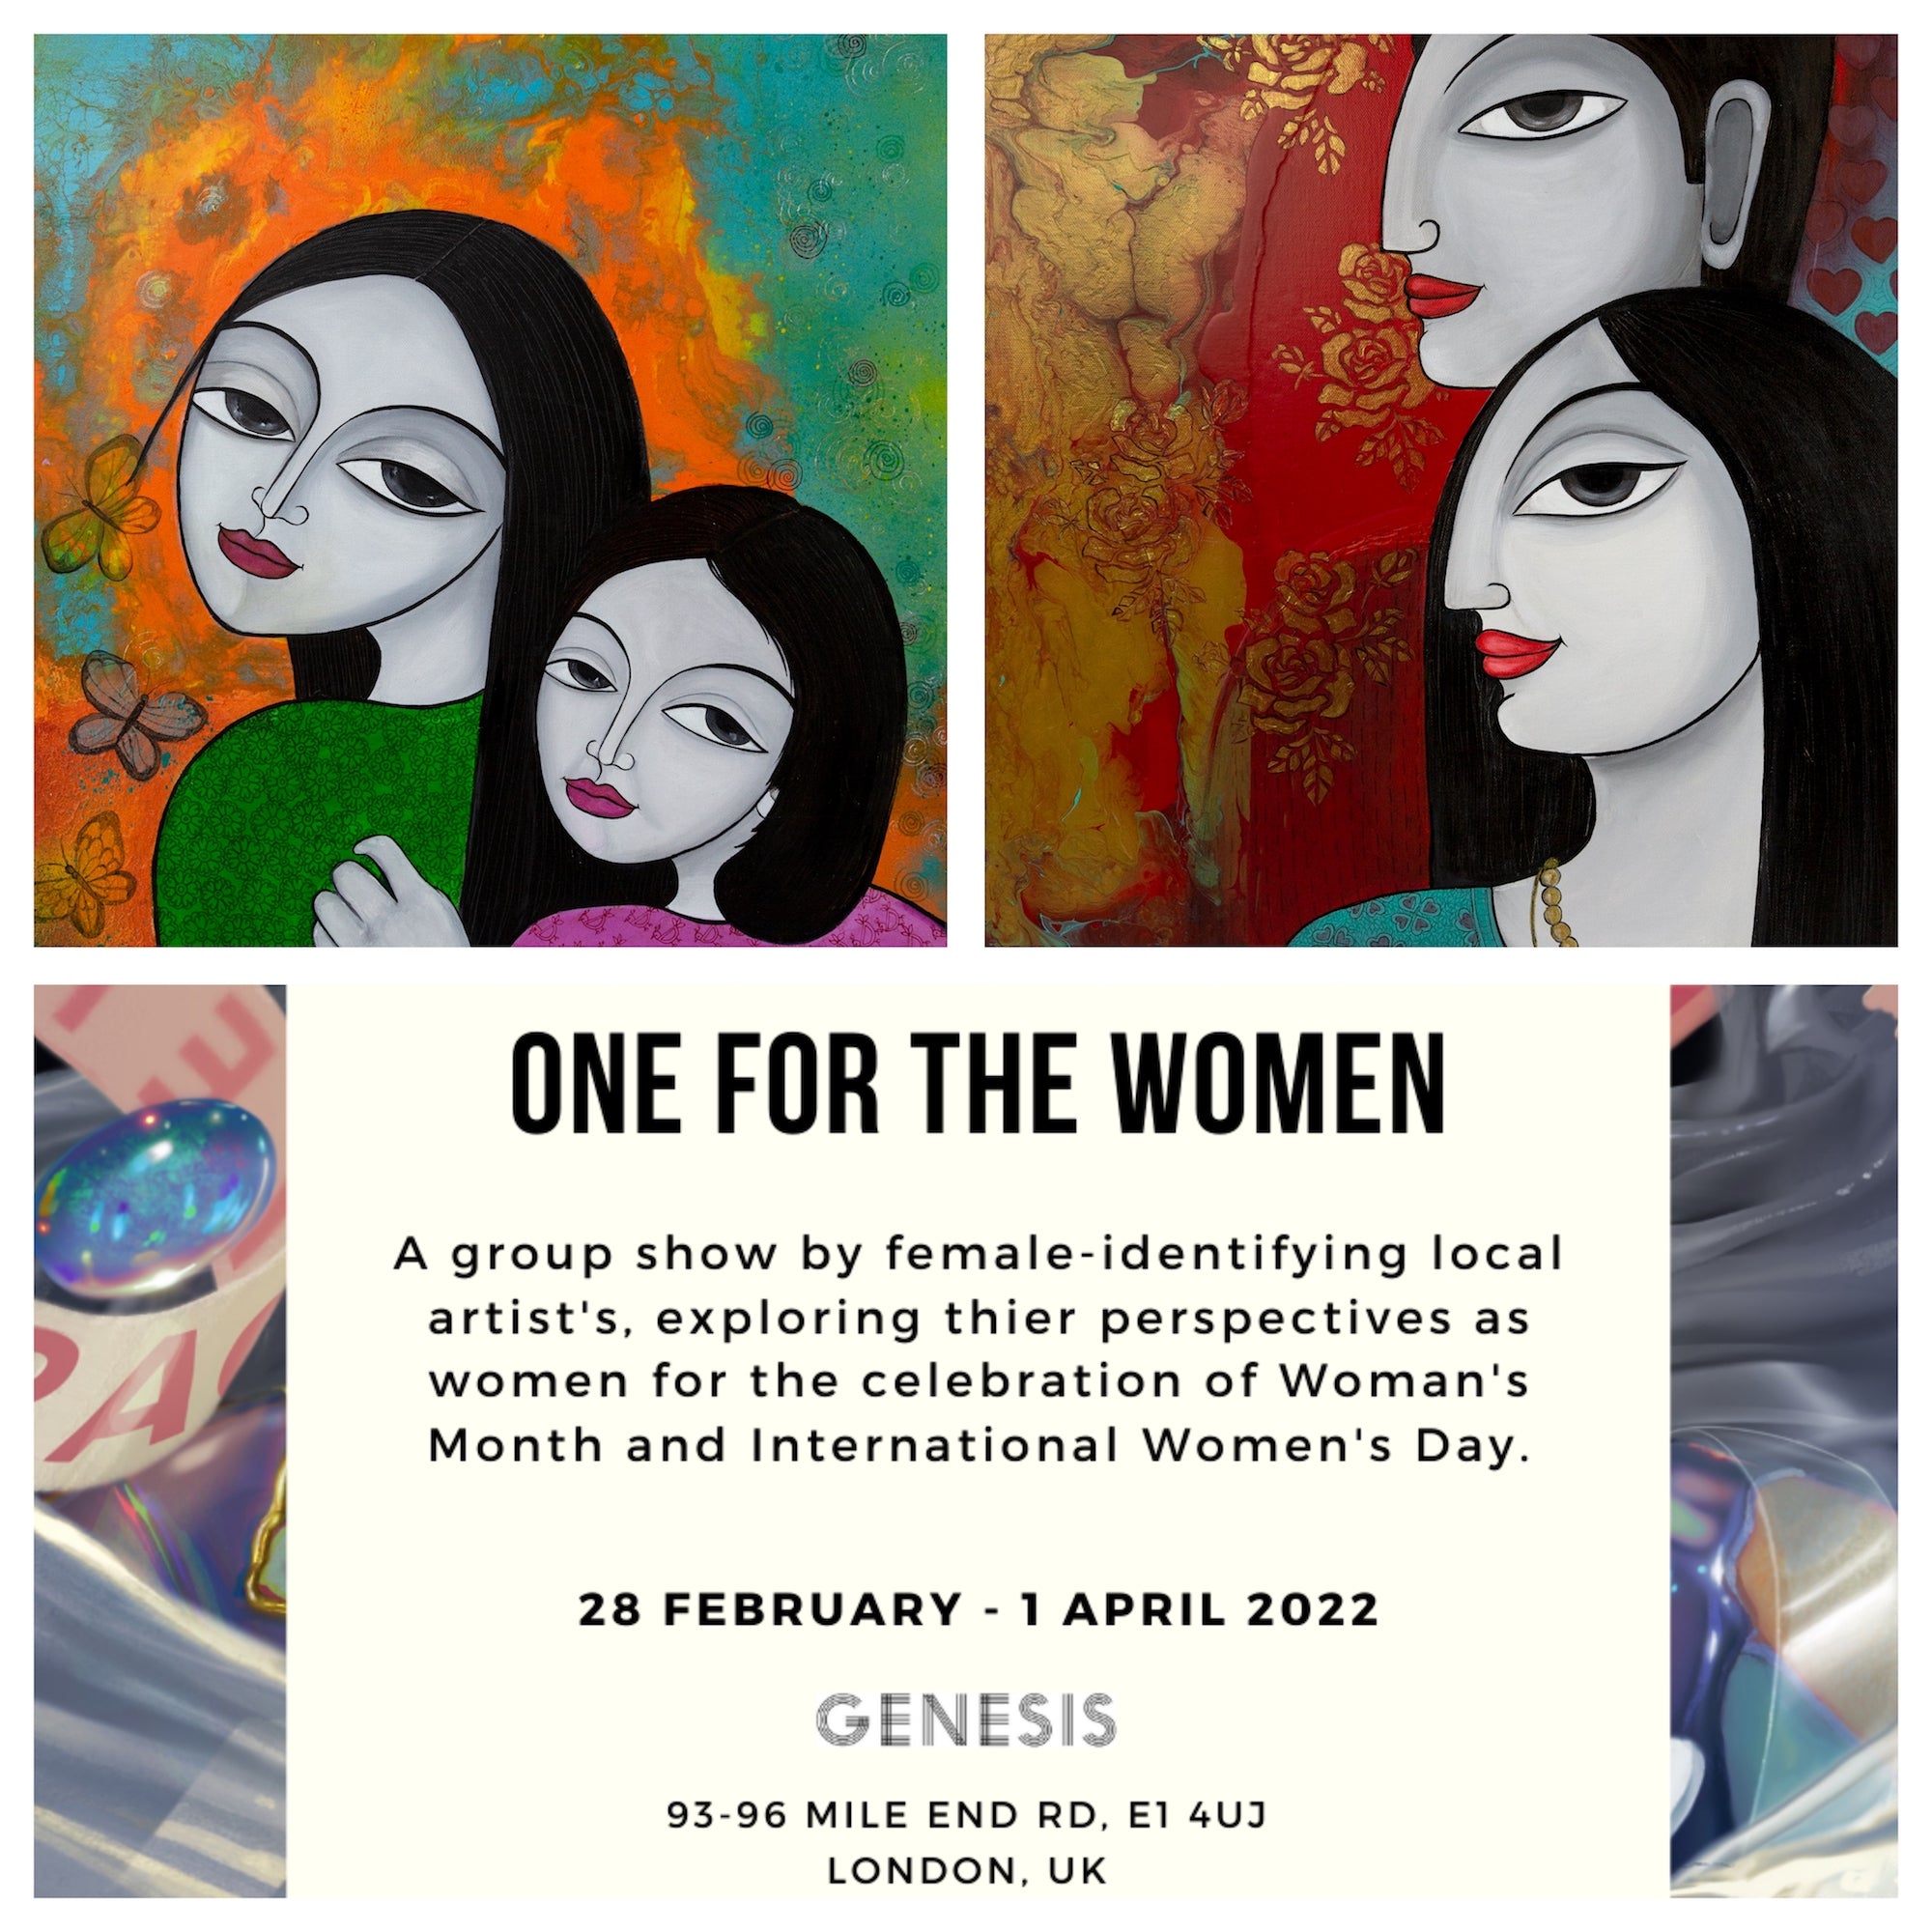 poster for art exhibition in east london-one for the women- 28.02.22 till 01.04.22